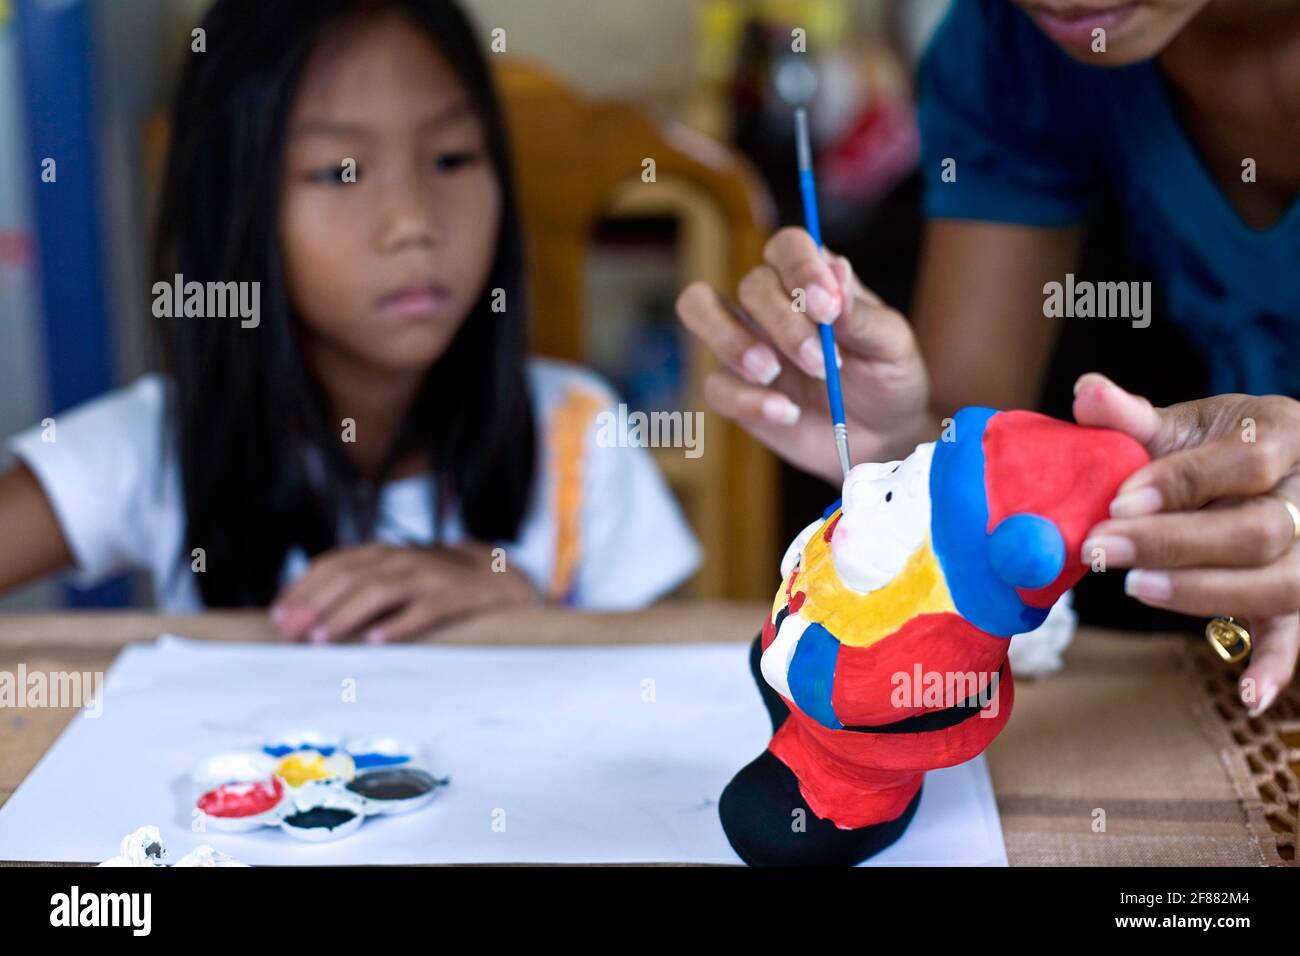 Child painting ceramic figure with help and guidance from her mother Stock Photo